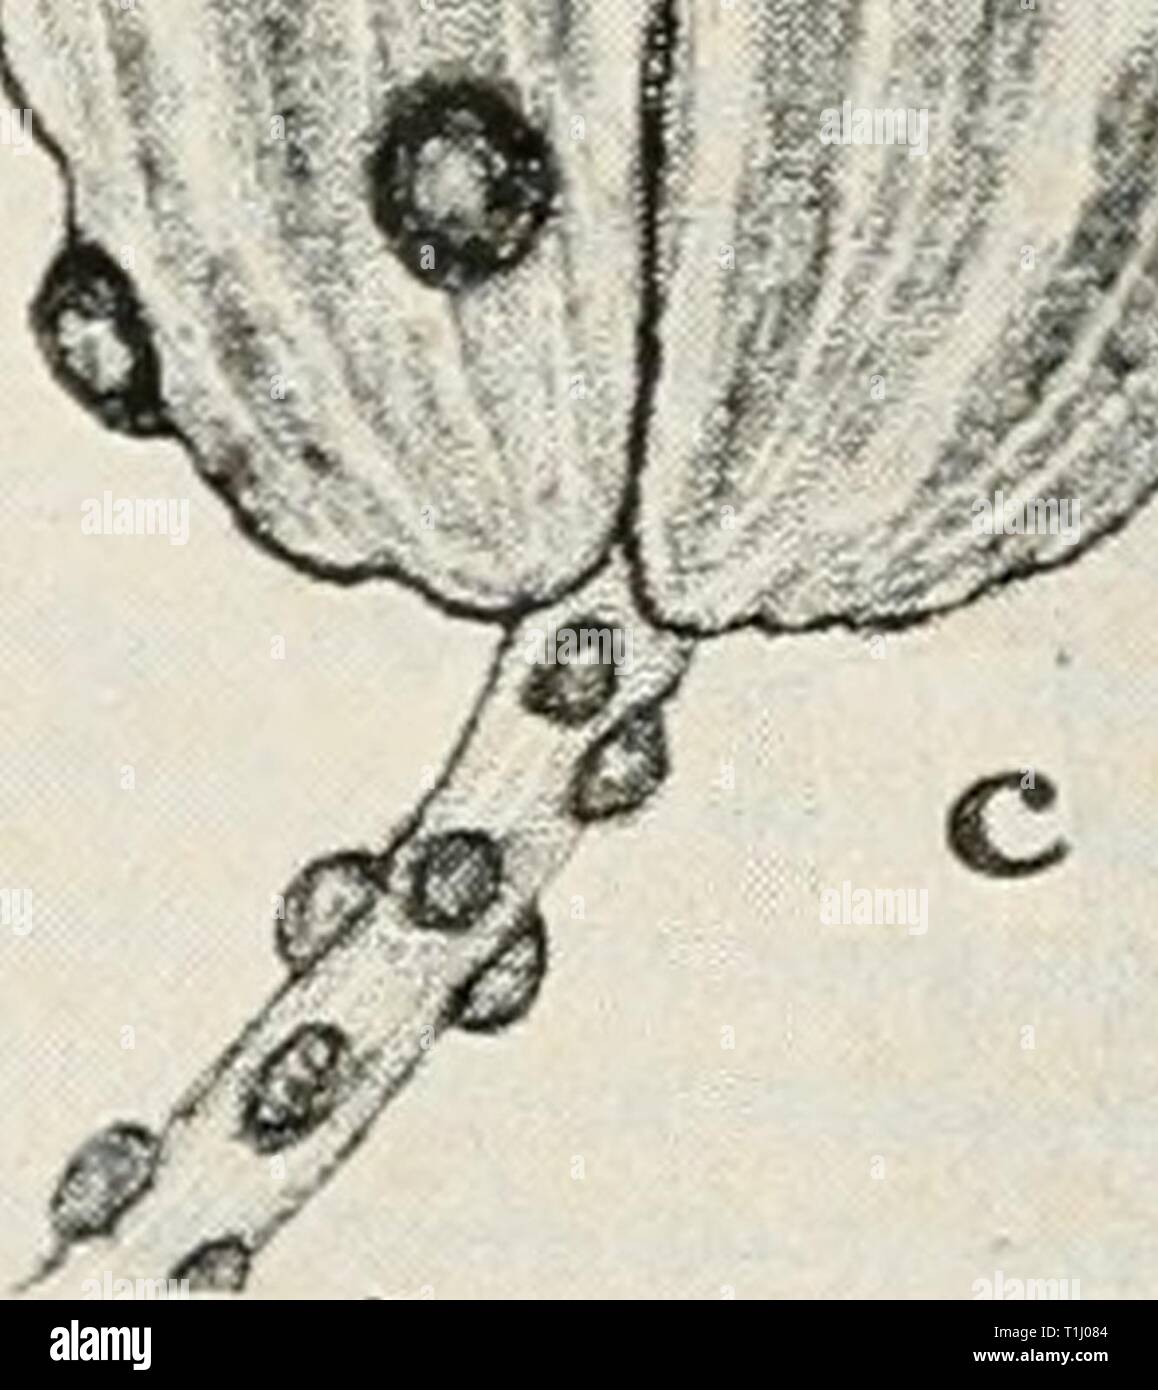 Diseases of truck crops and Diseases of truck crops and their control  diseasesoftruckc00taubuoft Year: [1918]  Fig. 69. Celery Diseases. a. Septoria leaf spot on leaf, b. Septoria leaf spot on leaflet, c. Septoria lesions on celery seed, d. Septoria spots showing pycnidial bodies, e. cross section showing pyncidium and pycnospores of Septoria pelroselini (a, c, and e after Coons and Levin). Stock Photo